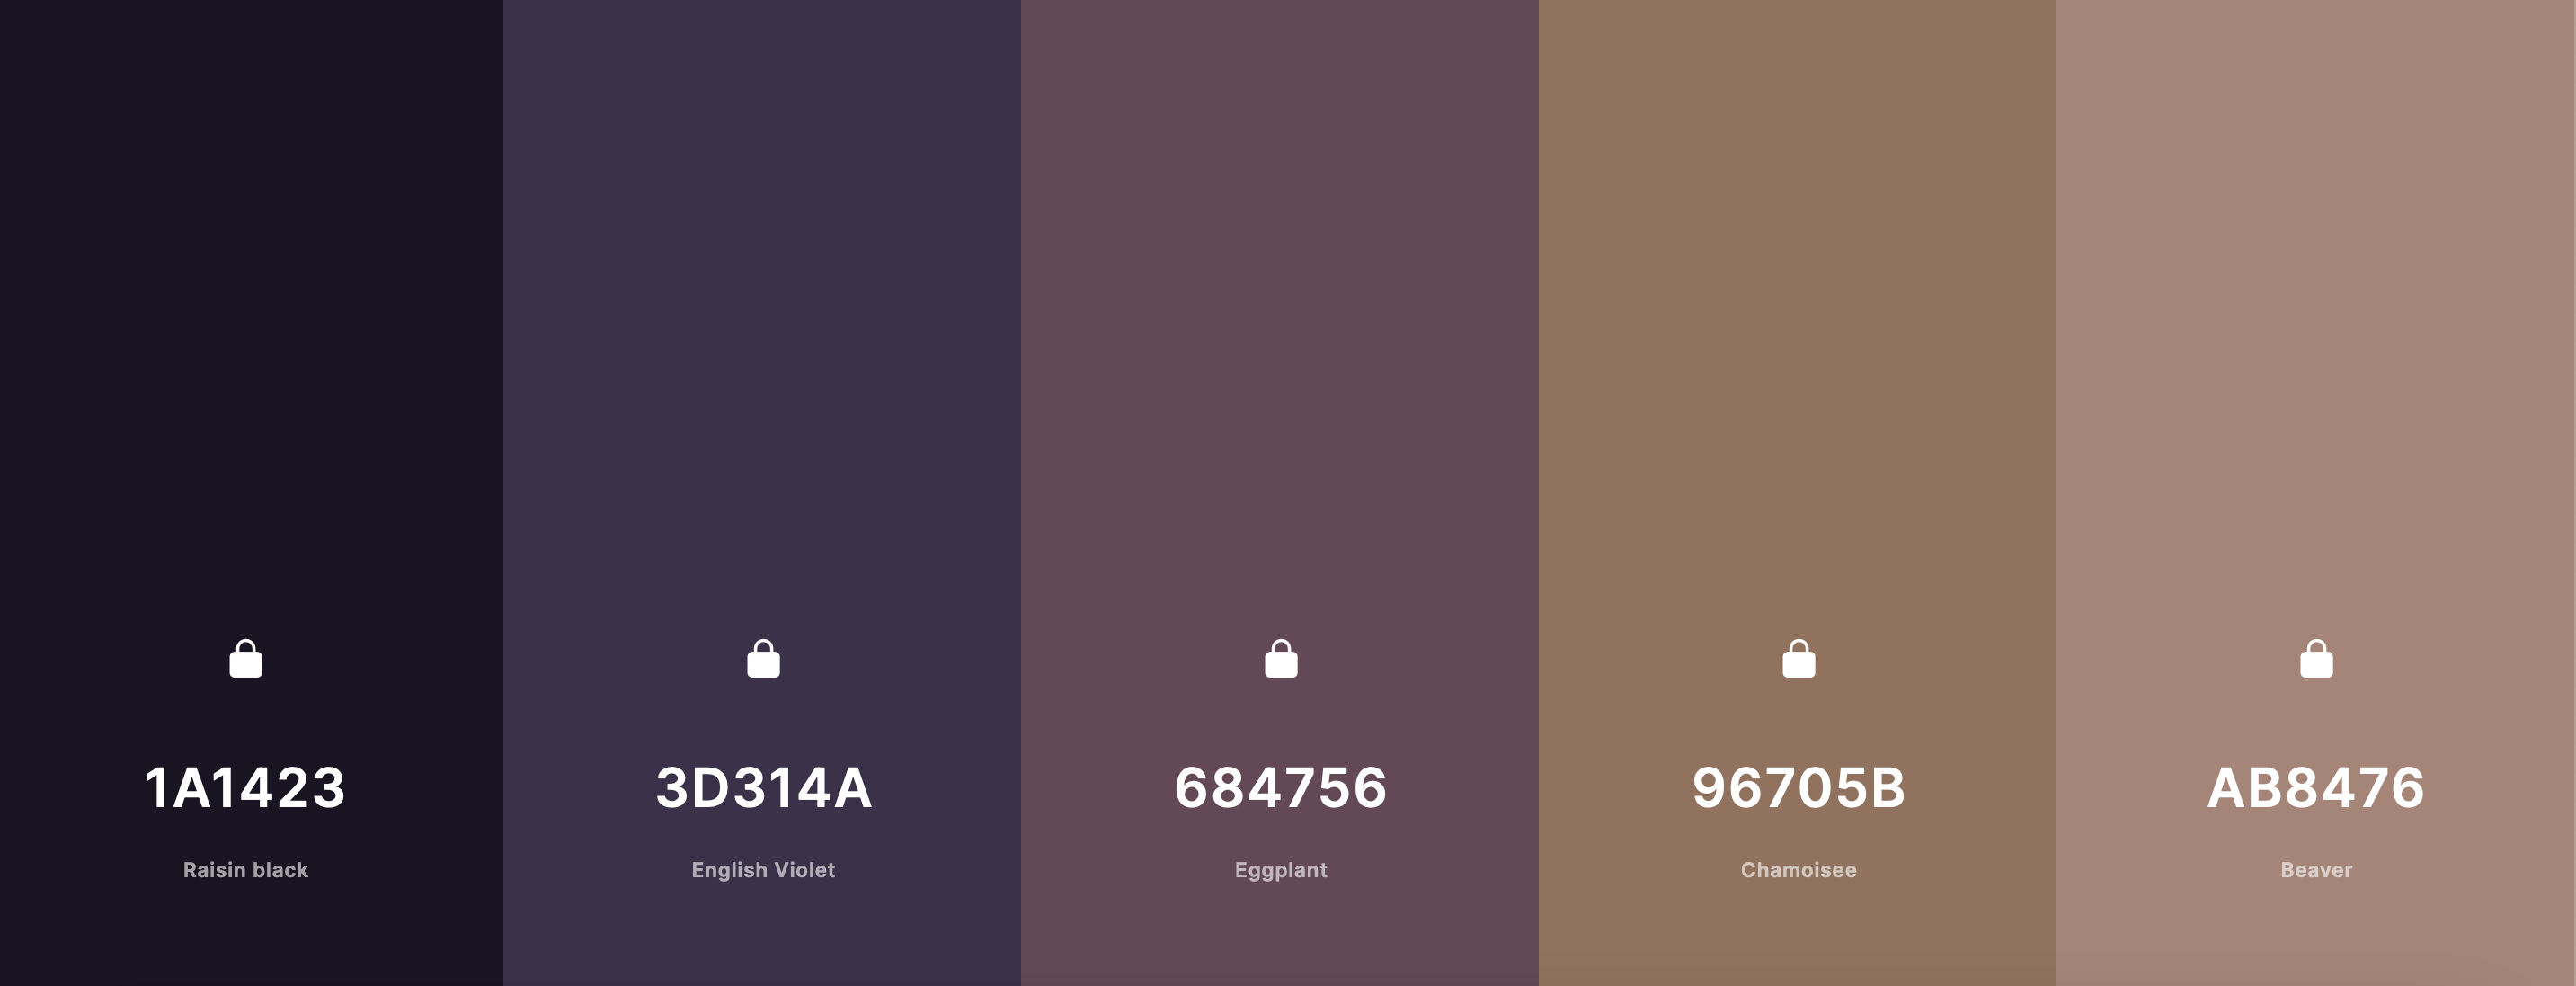 A color pallet featuring warm purples and browns